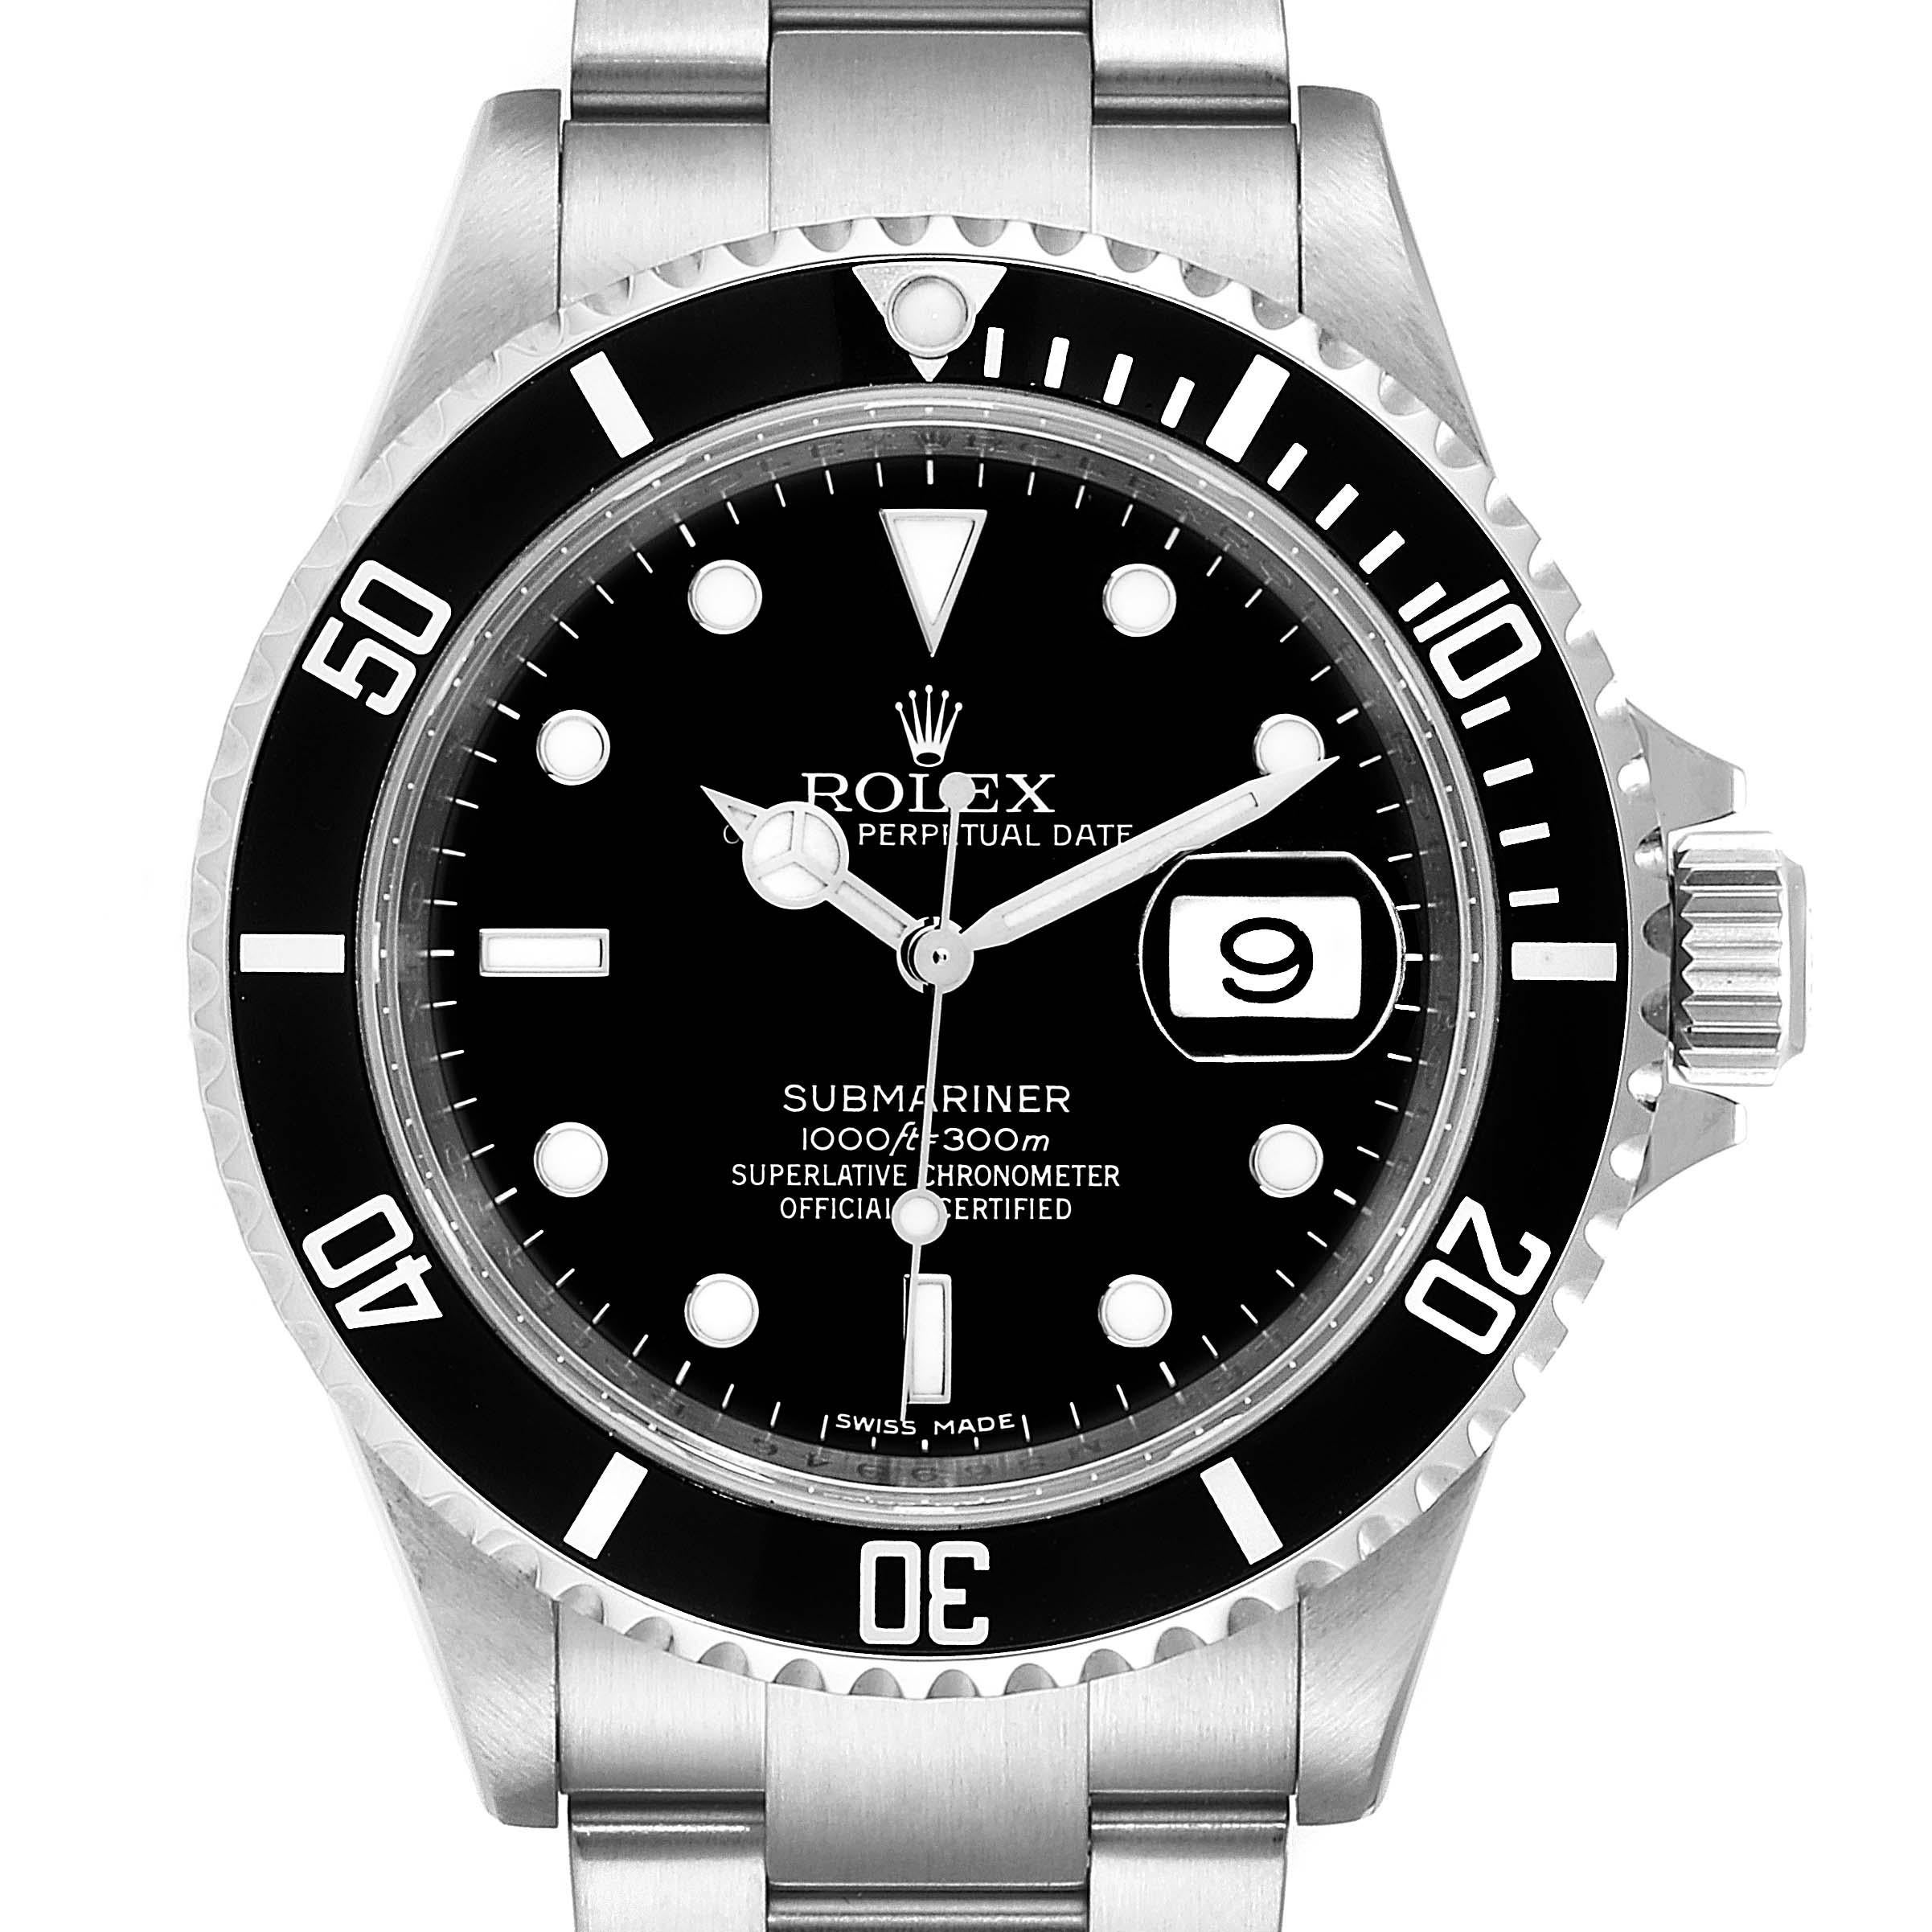 Rolex Submariner Date 40mm Stainless Steel Mens Watch 16610 Box Card. Officially certified chronometer self-winding movement. Stainless steel case 40.0 mm in diameter. Rolex logo on a crown. Special time-lapse unidirectional rotating bezel. Scratch